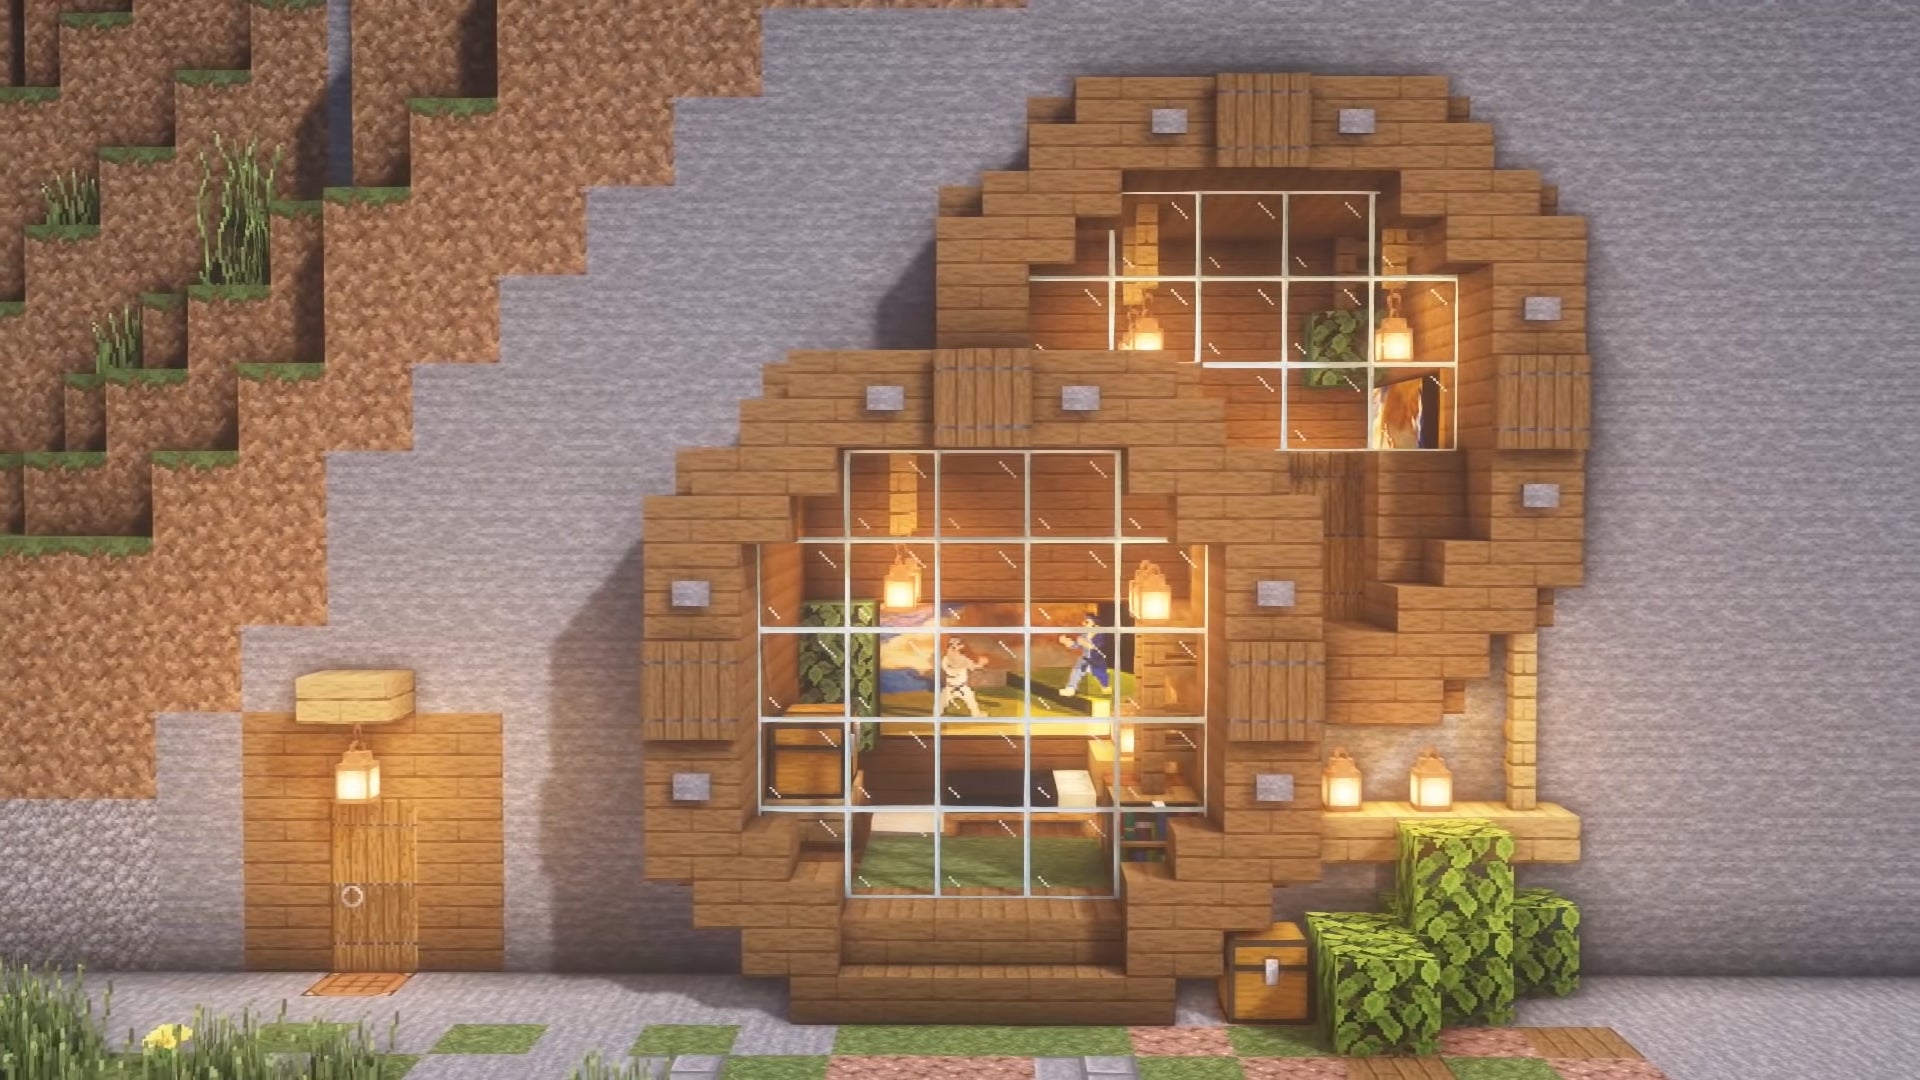 A house in Minecraft built into the side of a mountain, built by YouTuber "JUNS MAB Architecture tutorial".